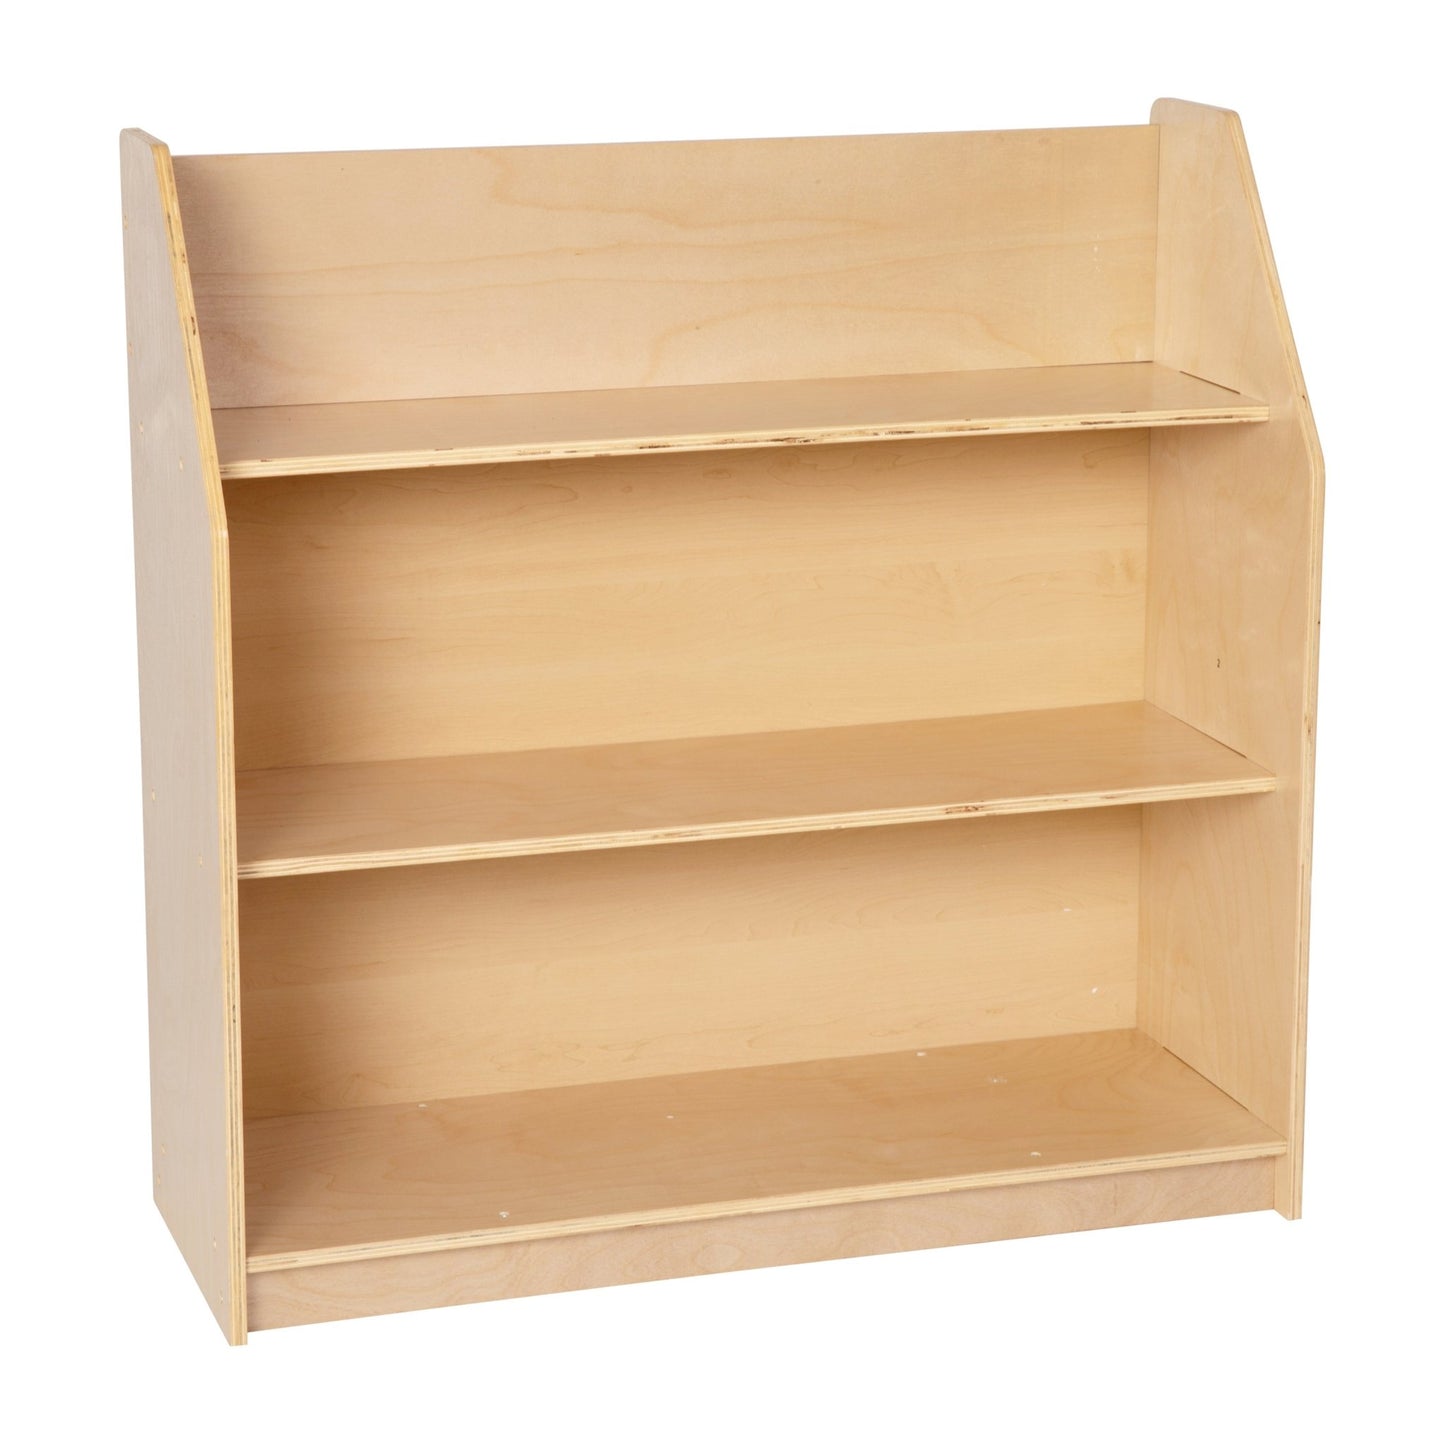 Hercules Natural Wooden 3 Shelf Book Display with Safe, Kid Friendly Curved Edges - Commercial Grade for Daycare, Classroom or Playroom Storage - SchoolOutlet